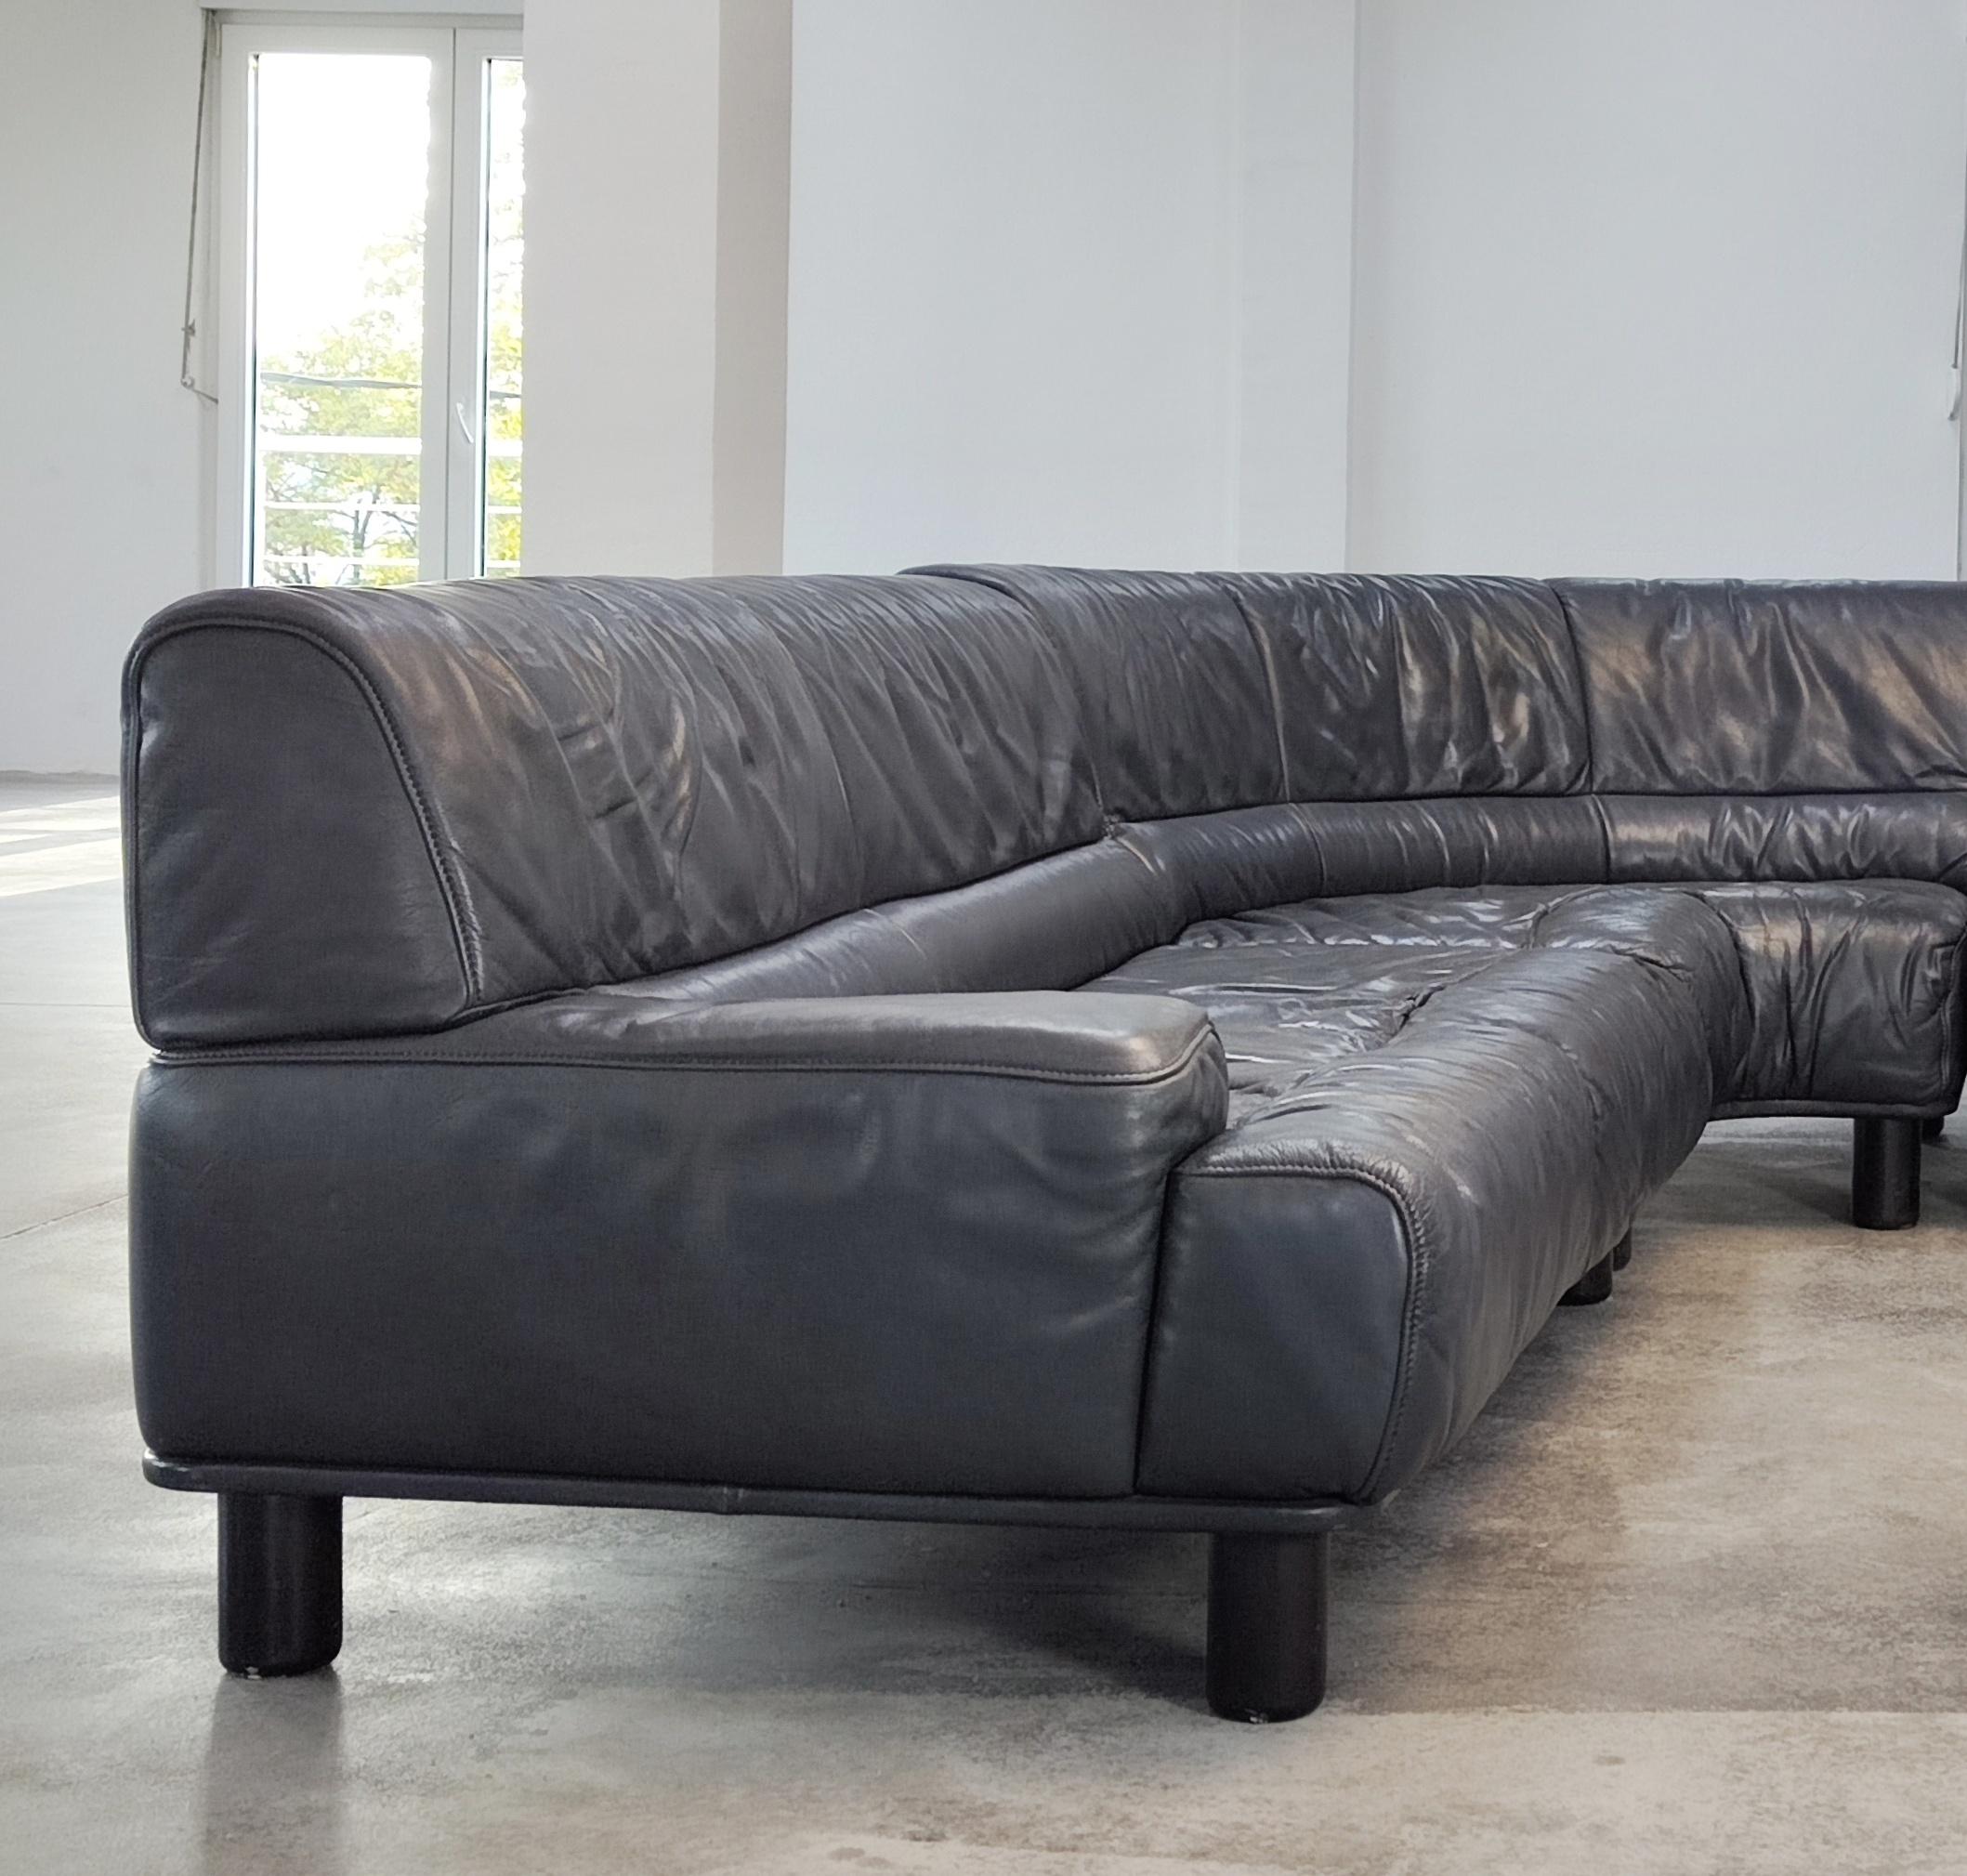 Late 20th Century Sectional Anthracite Gray Leather Sofa DS-18 by De Sede, Switzerland 1980s For Sale